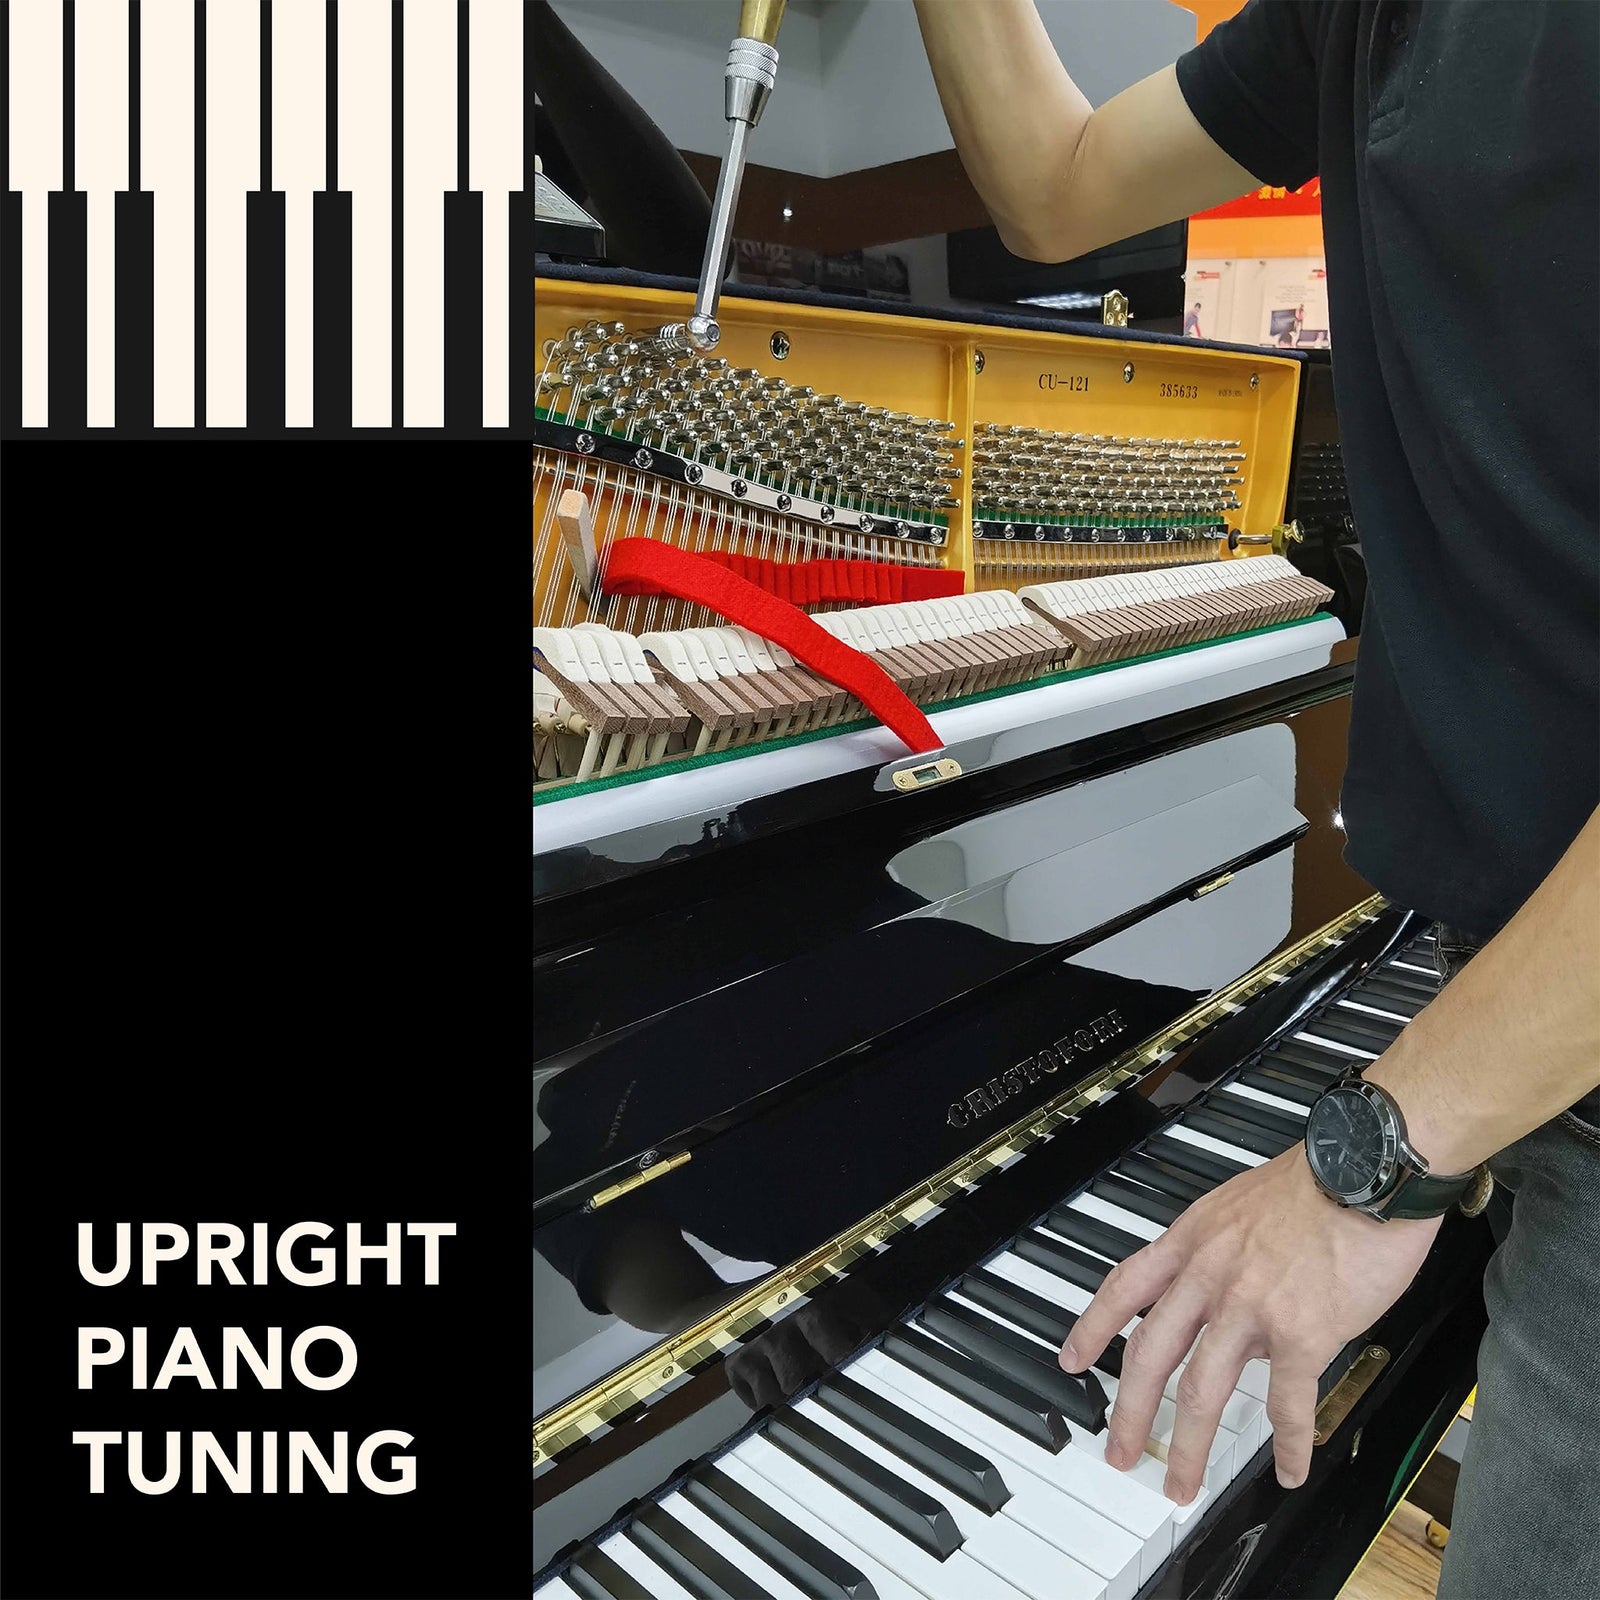 Tuning - Upright Piano (Public) (to be utitlized once every 6 mths after purchase)